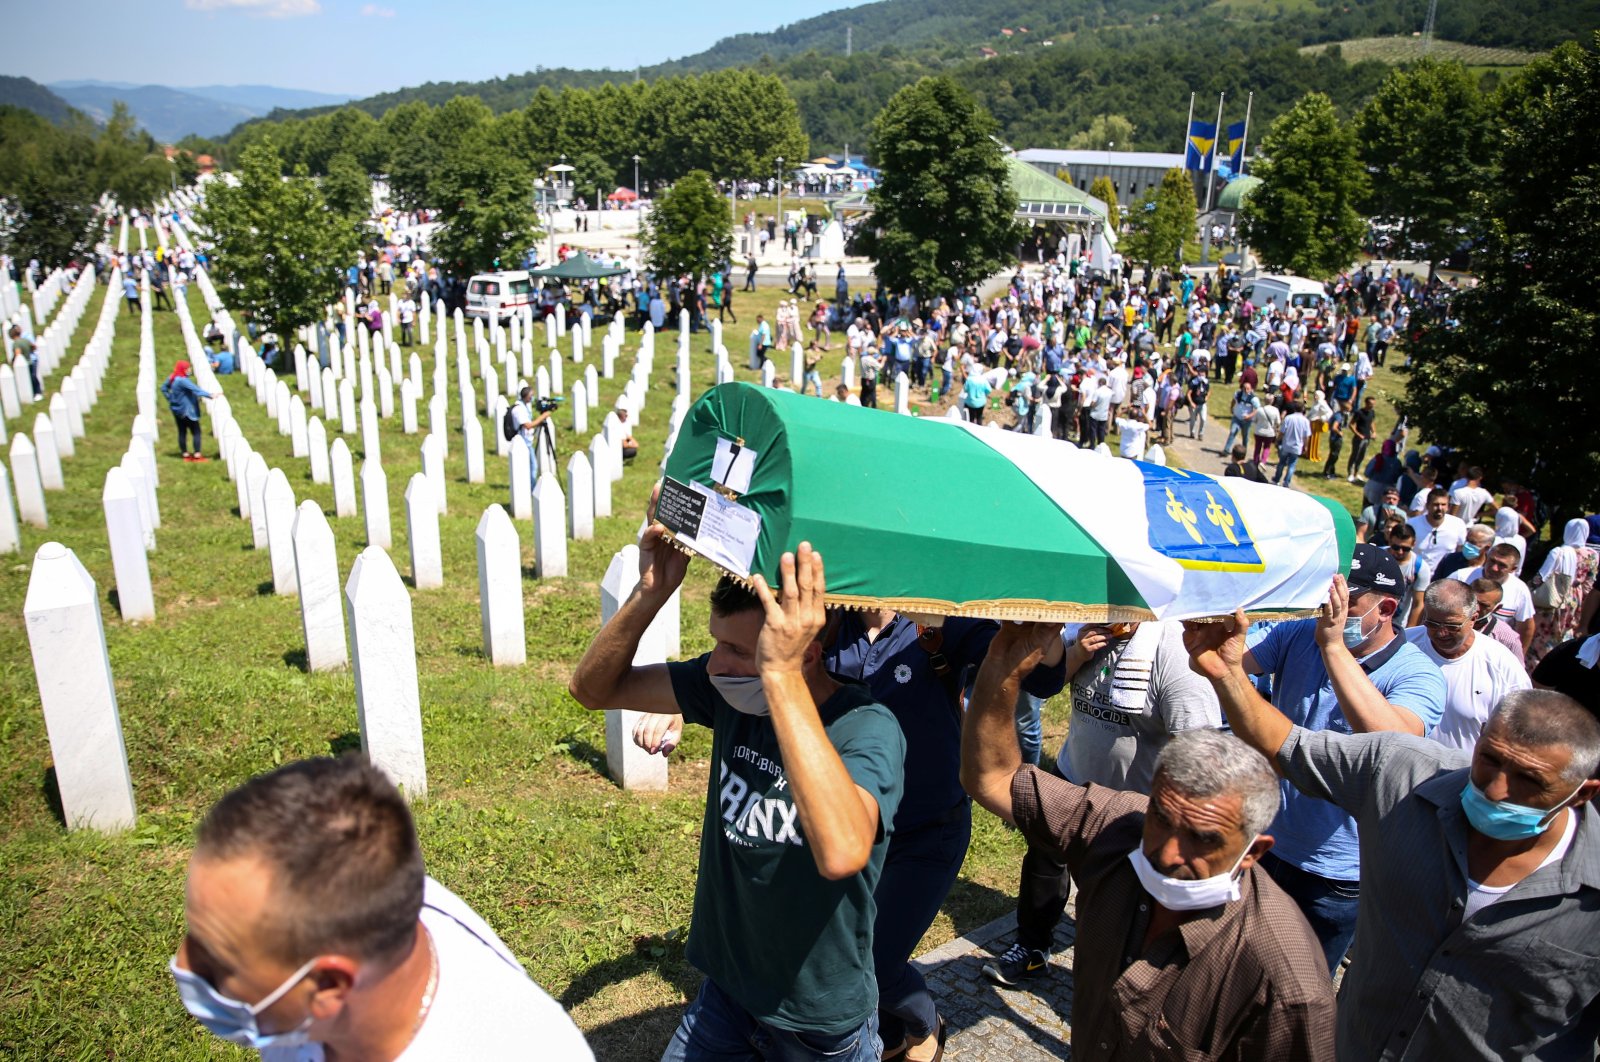 Men carry a coffin at a graveyard during a mass funeral in Potocari near Srebrenica, Bosnia and Herzegovina, July 11, 2020. (Reuters Photo)